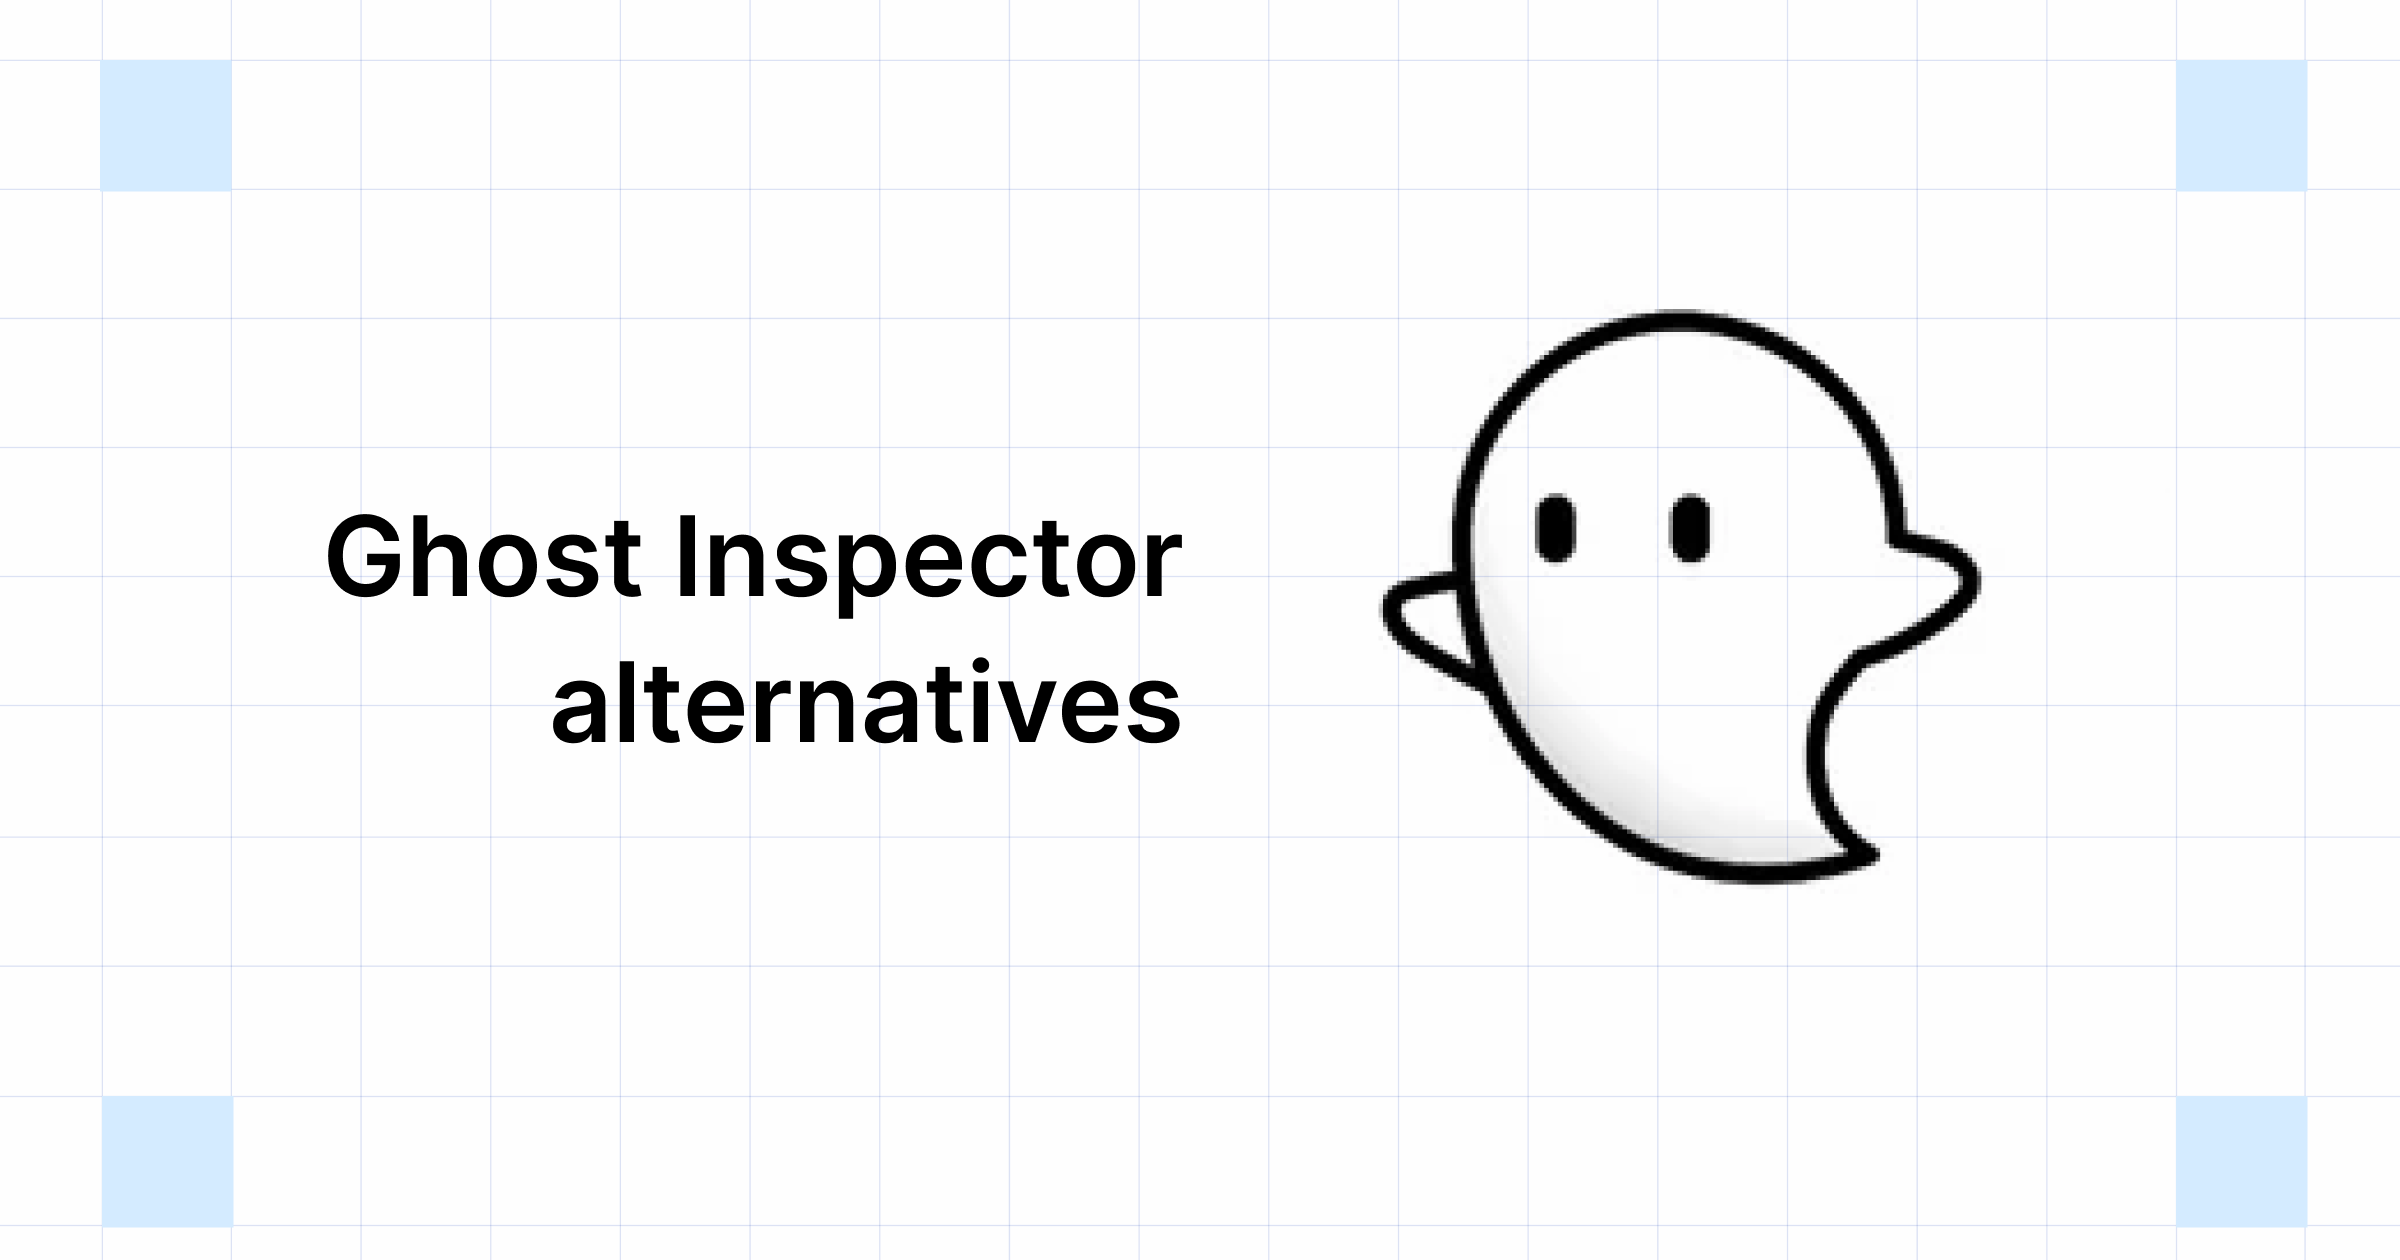 Best 15 Ghost Inspector Alternatives List to Look For